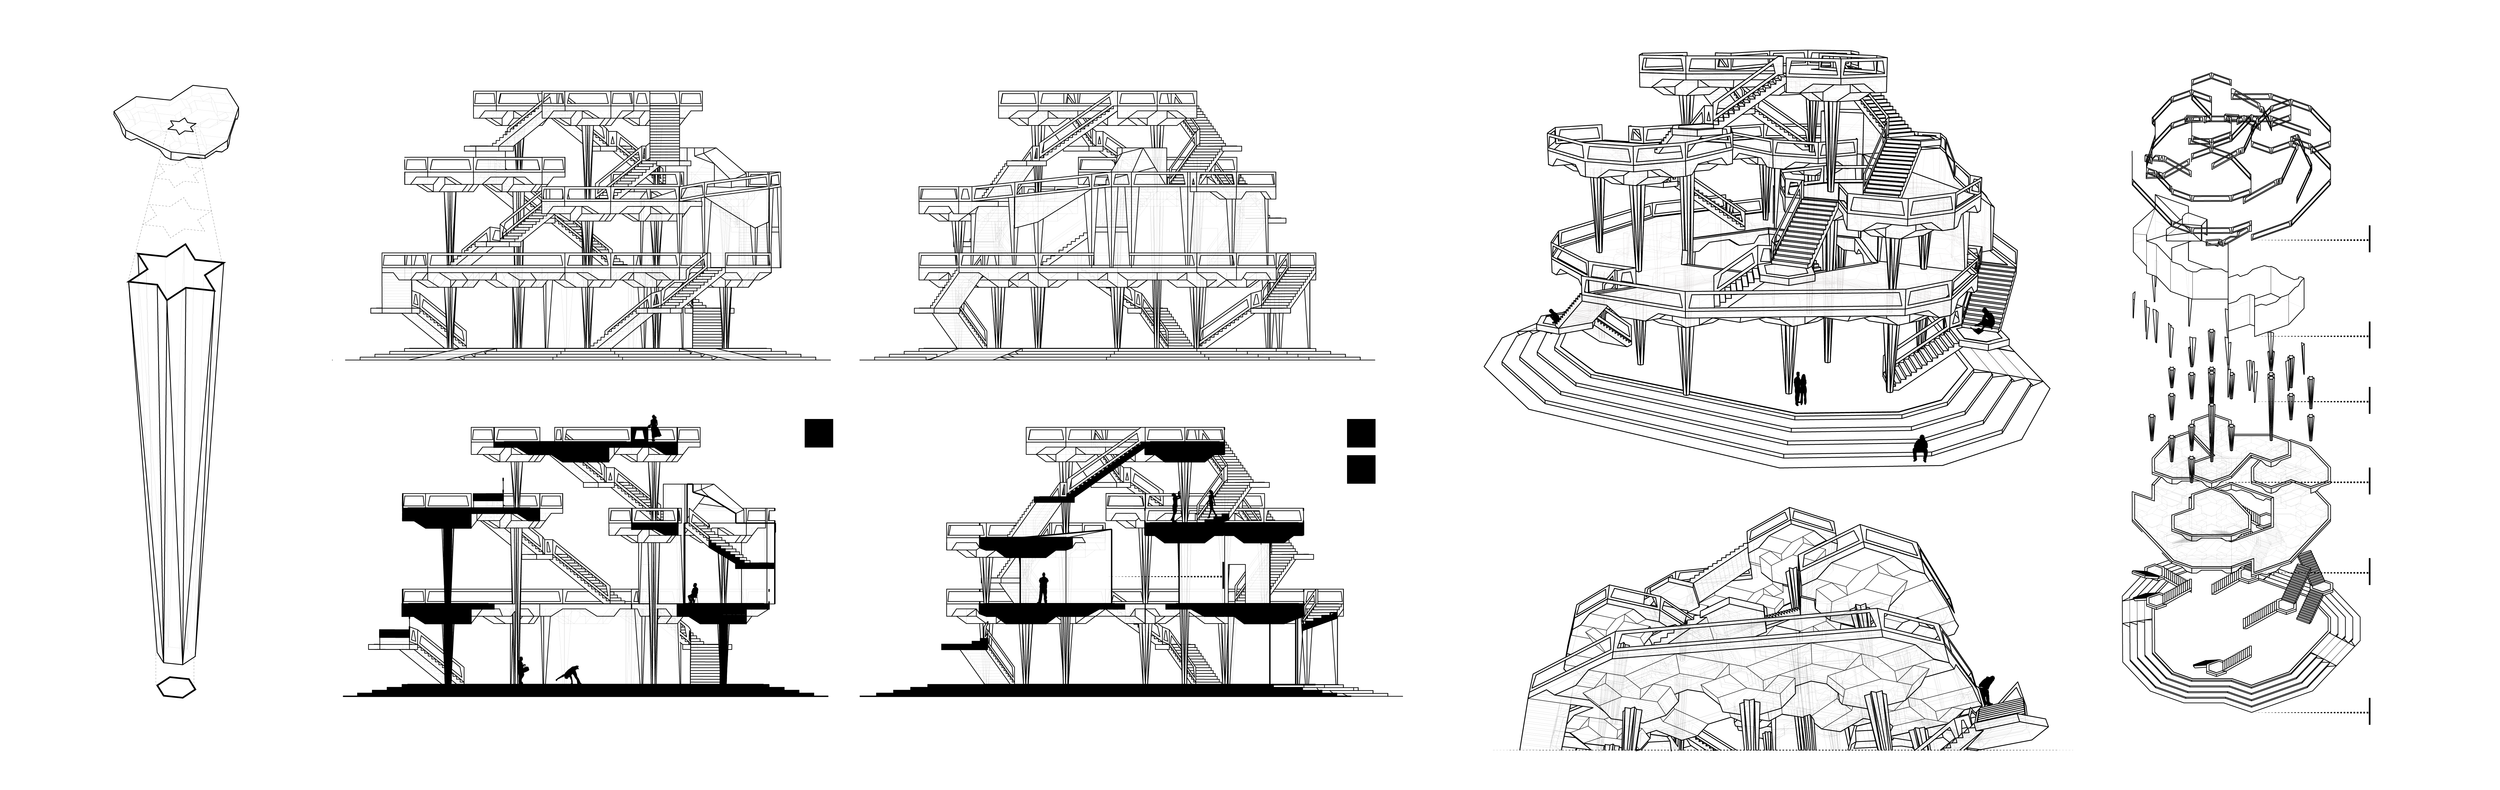 Column Shape, Elevations, Sections, Perspectives + Exploded Axonometric